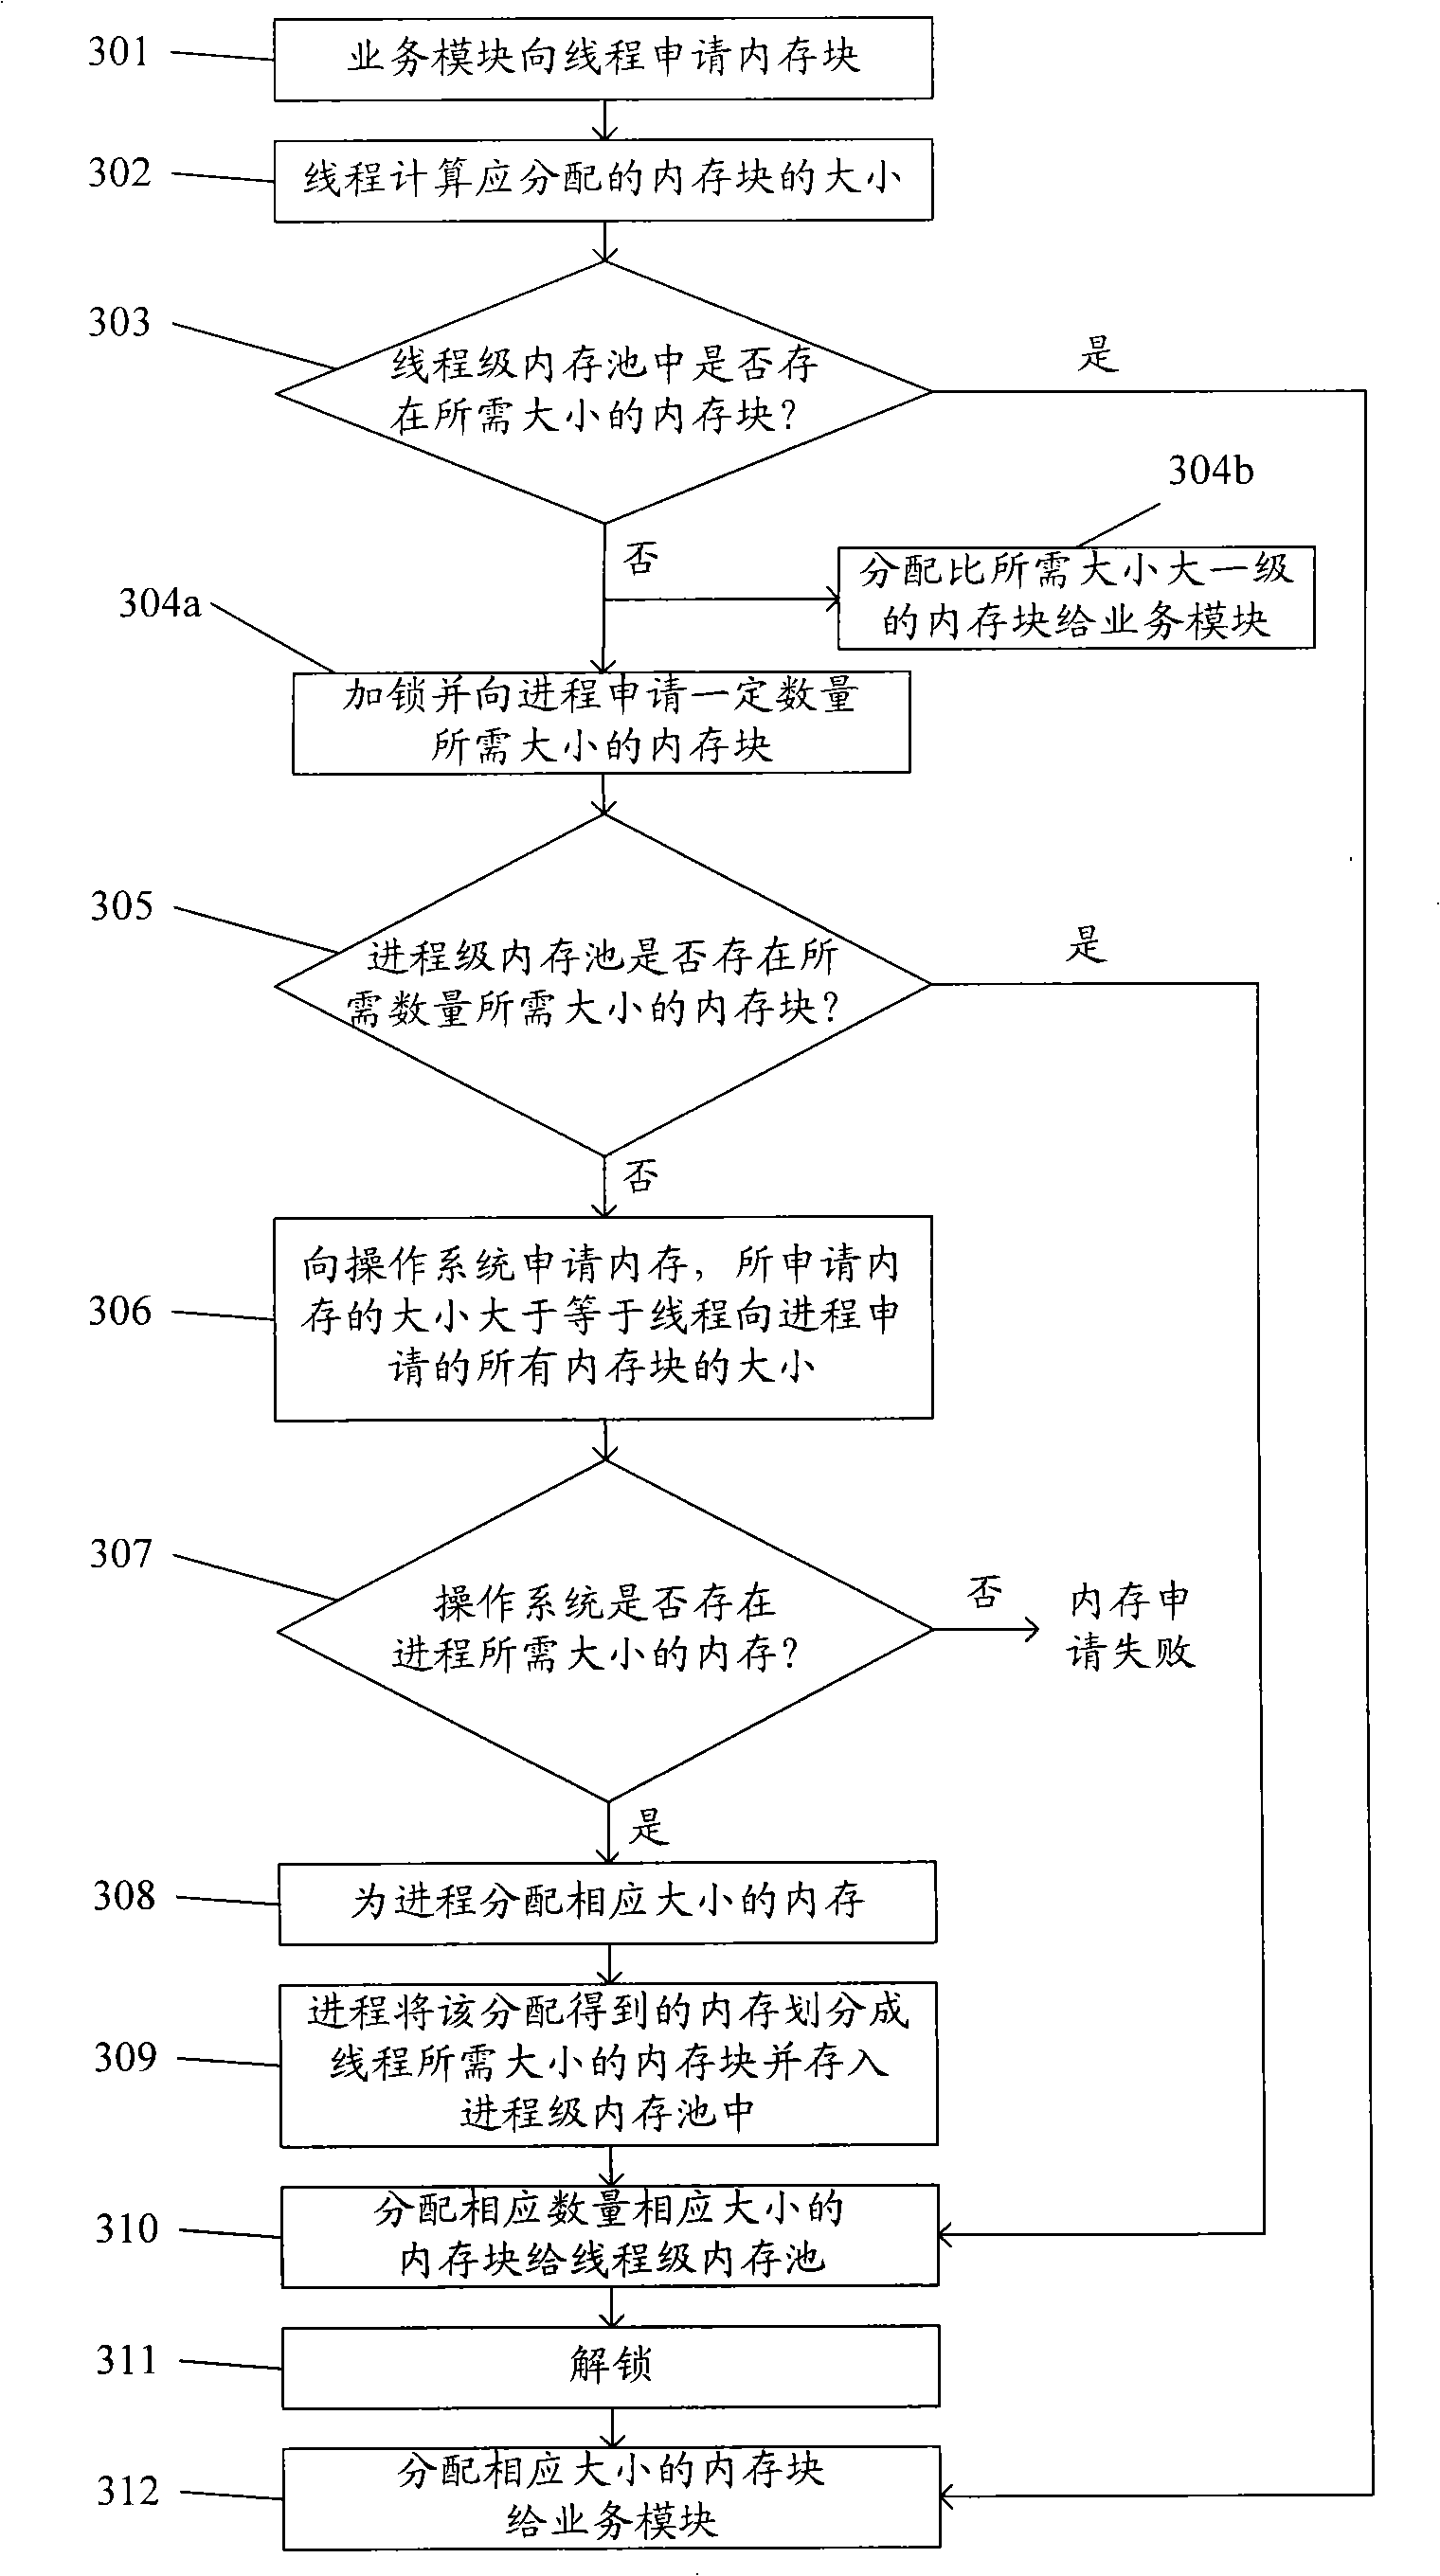 Internal memory operation management method and system